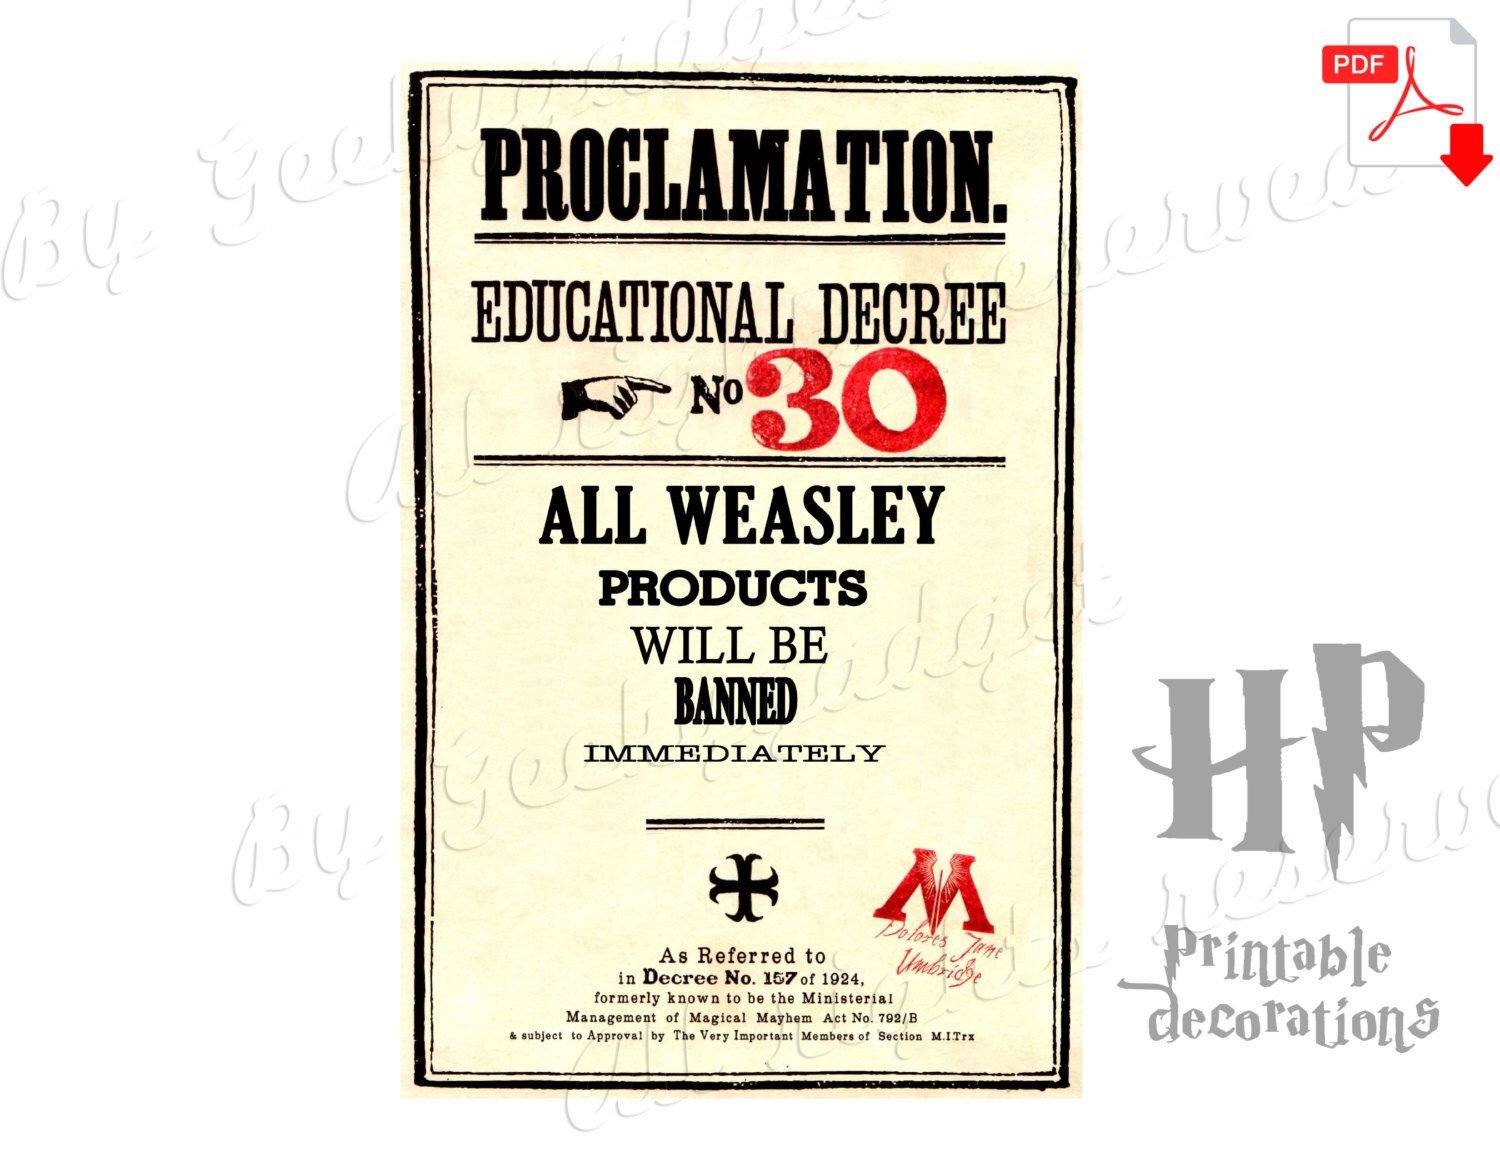 Weasley products Educational Decree proclamation 30